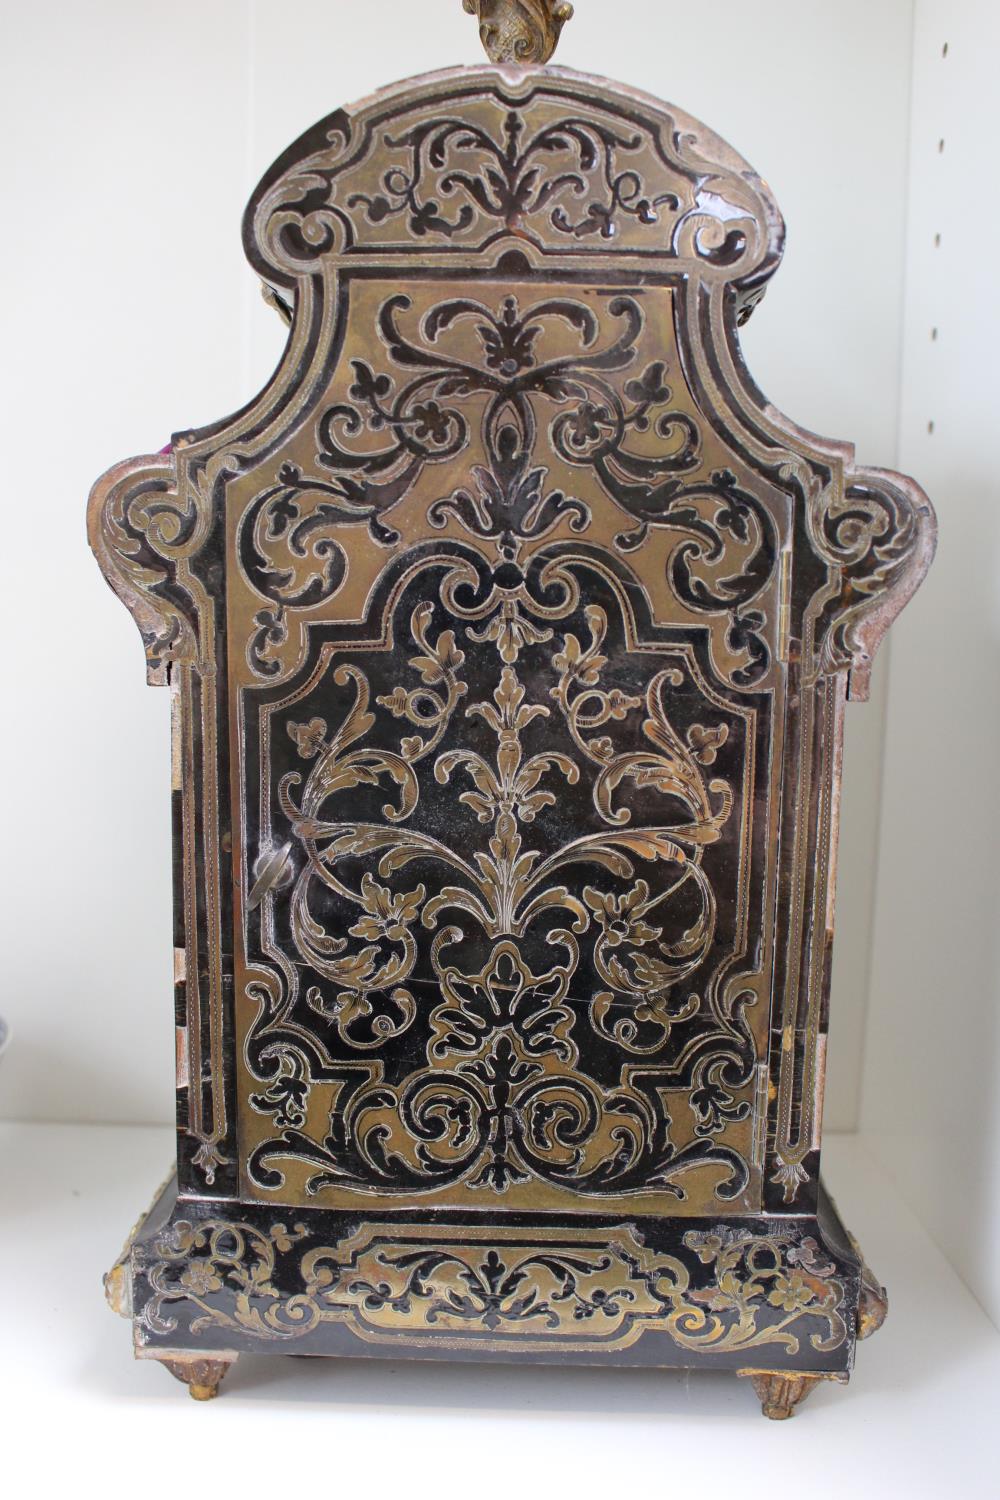 Late 19thC French Boulle mantel clock, The ormolu mounted arched case with all-over brass inlaid - Image 6 of 7